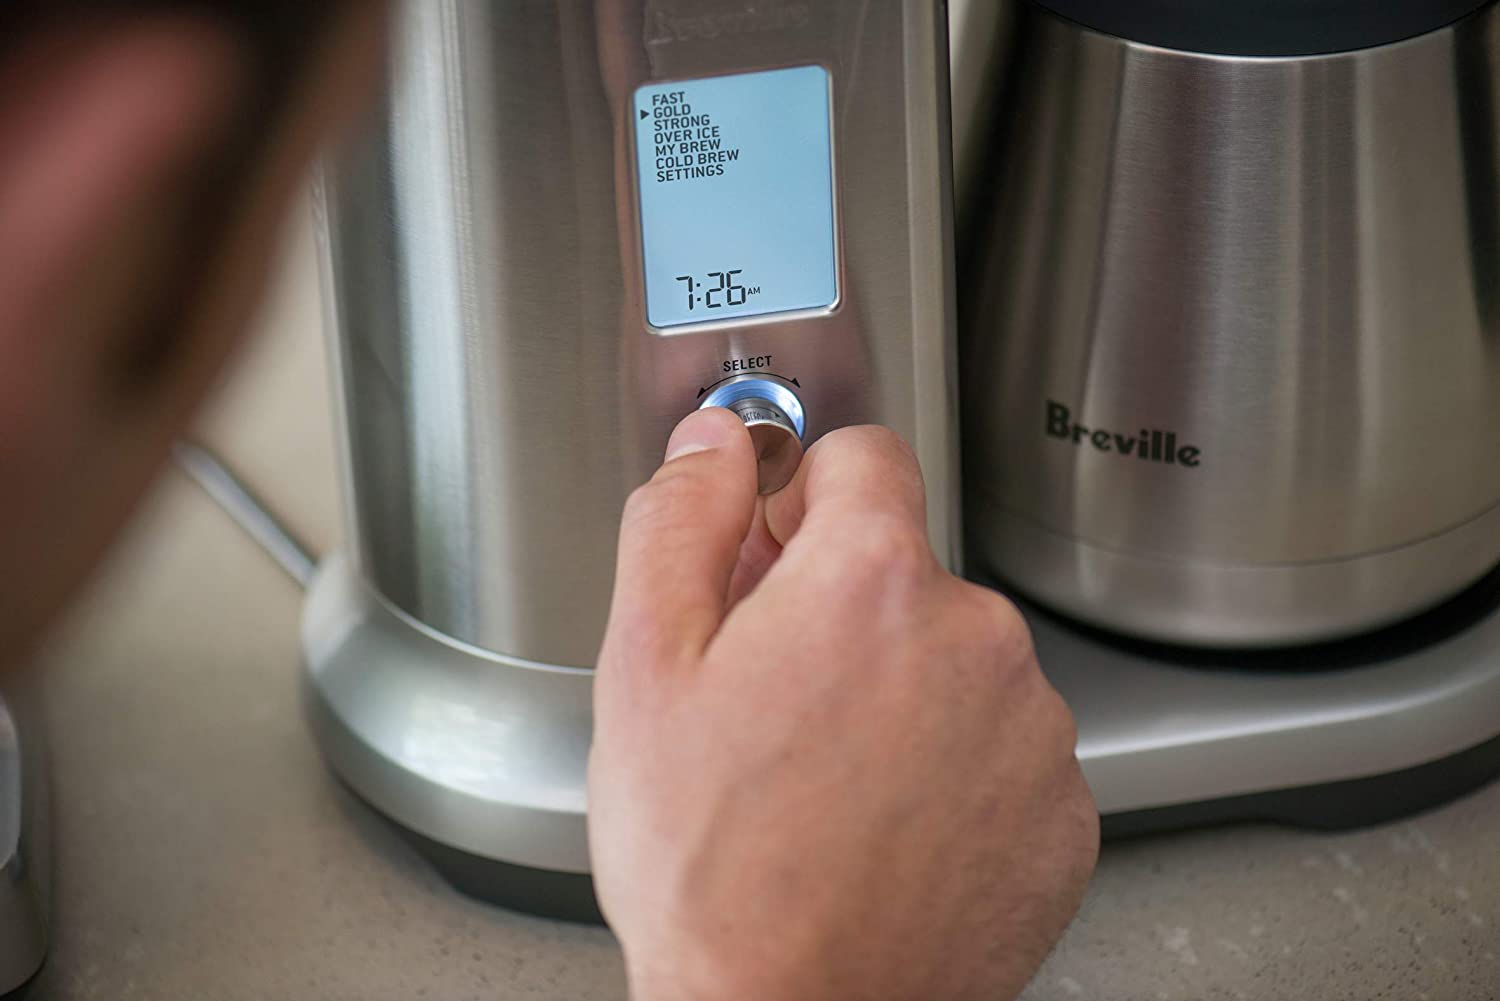 https://www.digitaltrends.com/wp-content/uploads/2022/09/Breville-Precision-Brewer-Thermal-Coffee-Maker-Controls.jpg?fit=500%2C335&p=1